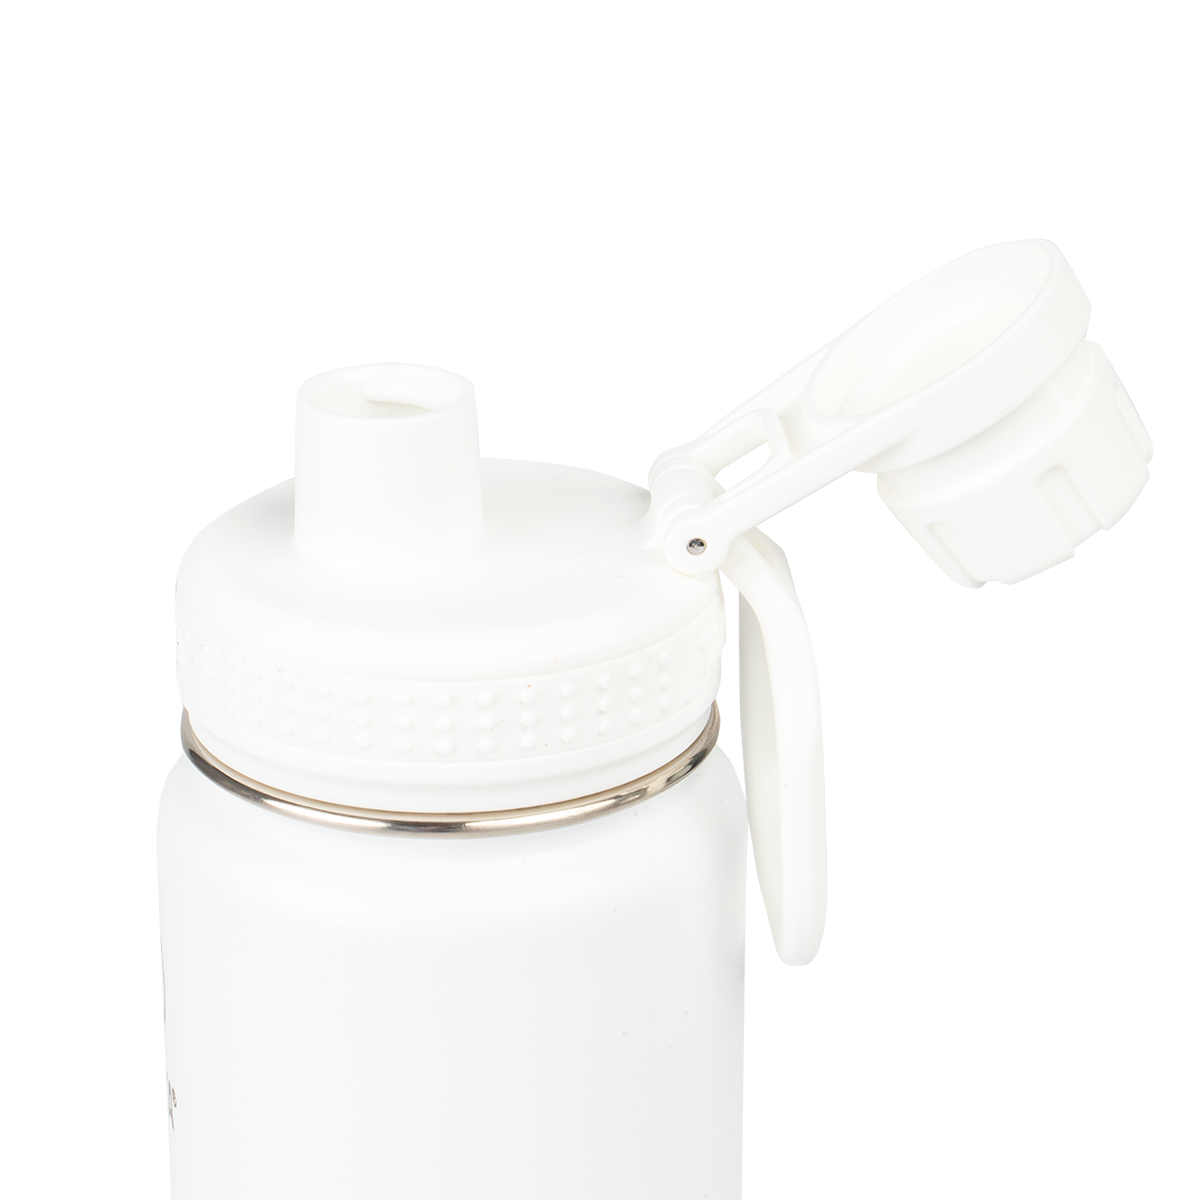 GrandTies 32 oz. Ivory White Travel Water Bottle - Wide Mouth Vacuum Insulated Water Bottle with 2-Style Lids